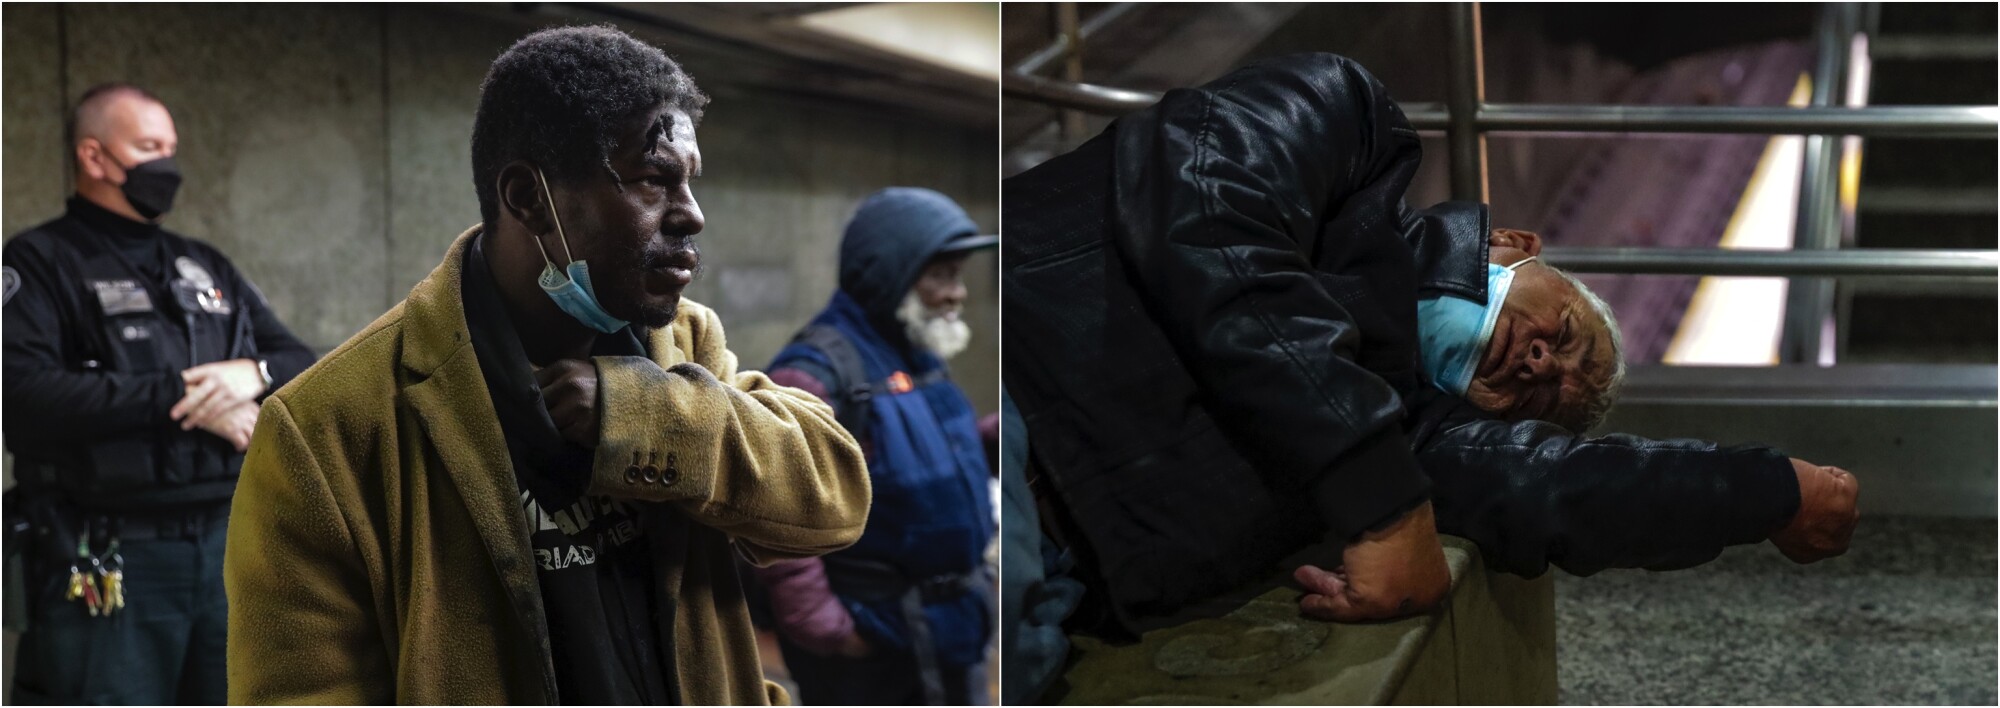 Left, a homeless man waits for gates to open. Right, a homeless man sleeps 